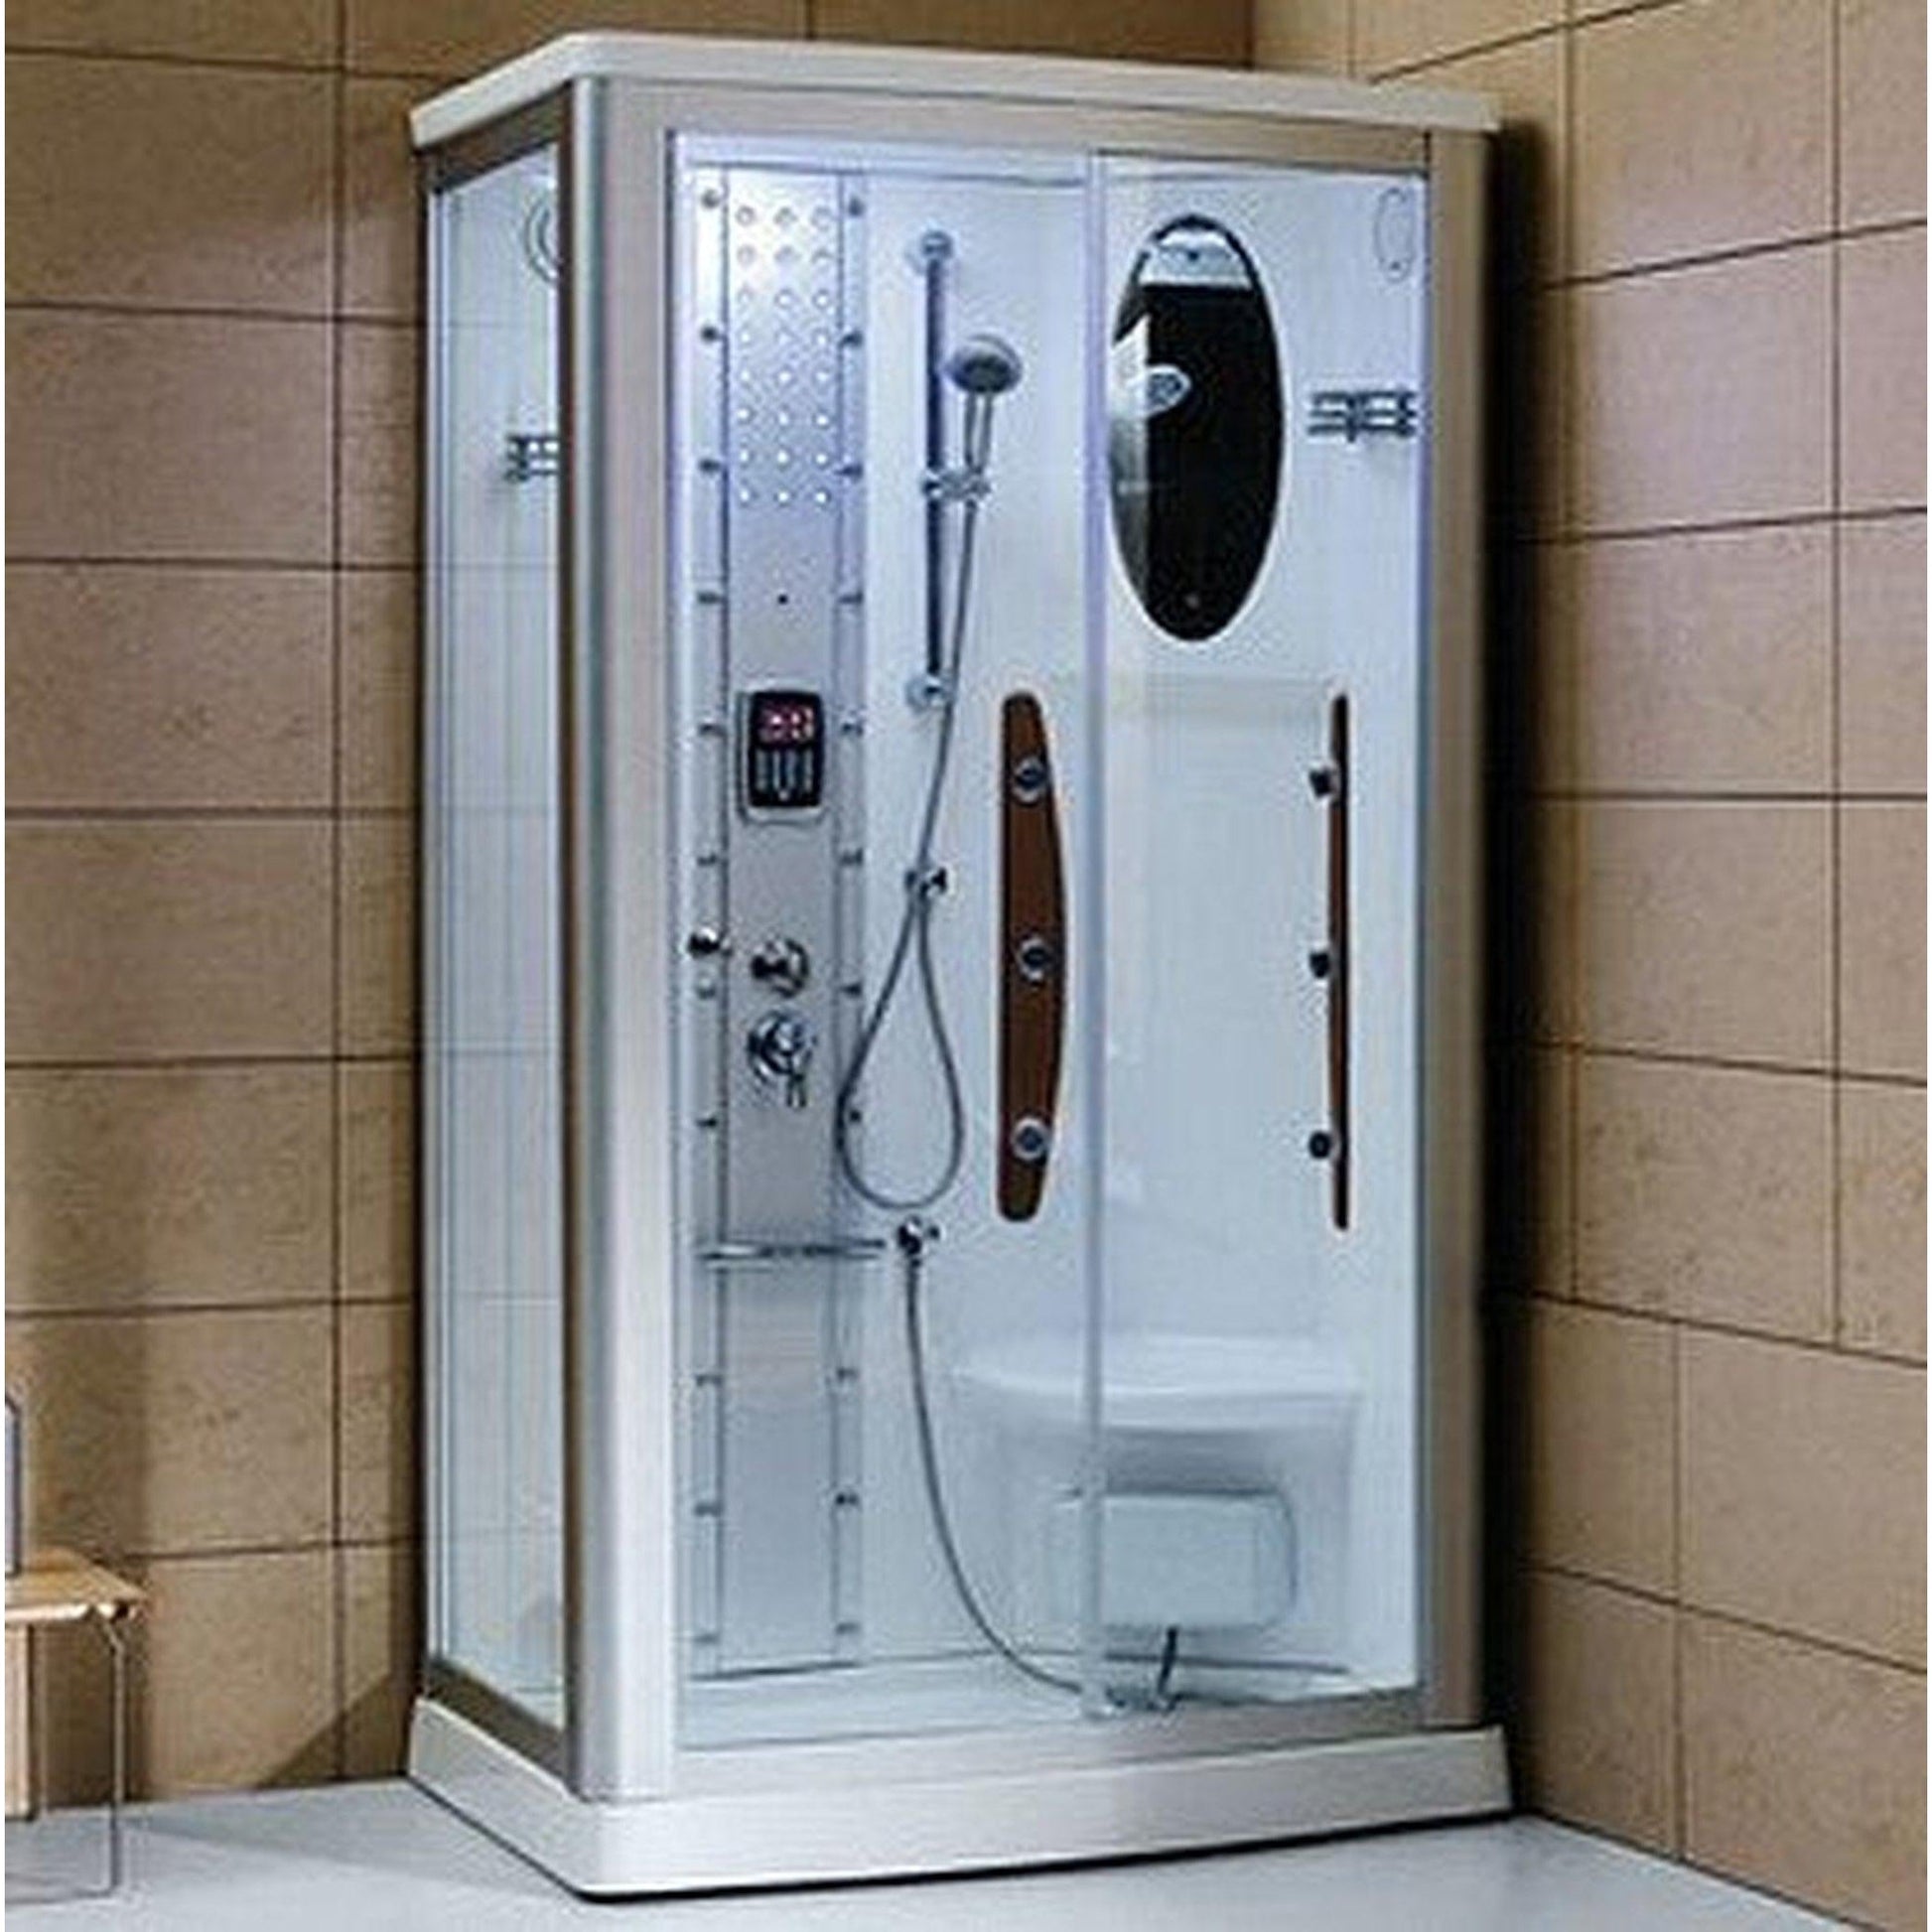 https://usbathstore.com/cdn/shop/products/Mesa-45-x-35-x-85-Clear-Tempered-Glass-Freestanding-Walk-In-Steam-Shower-With-Right-Hand-Control-Panel-Configuration-3kW-Steam-Generator-and-6-Acupuncture-Water-Body-Jets-2.jpg?v=1674077117&width=1946